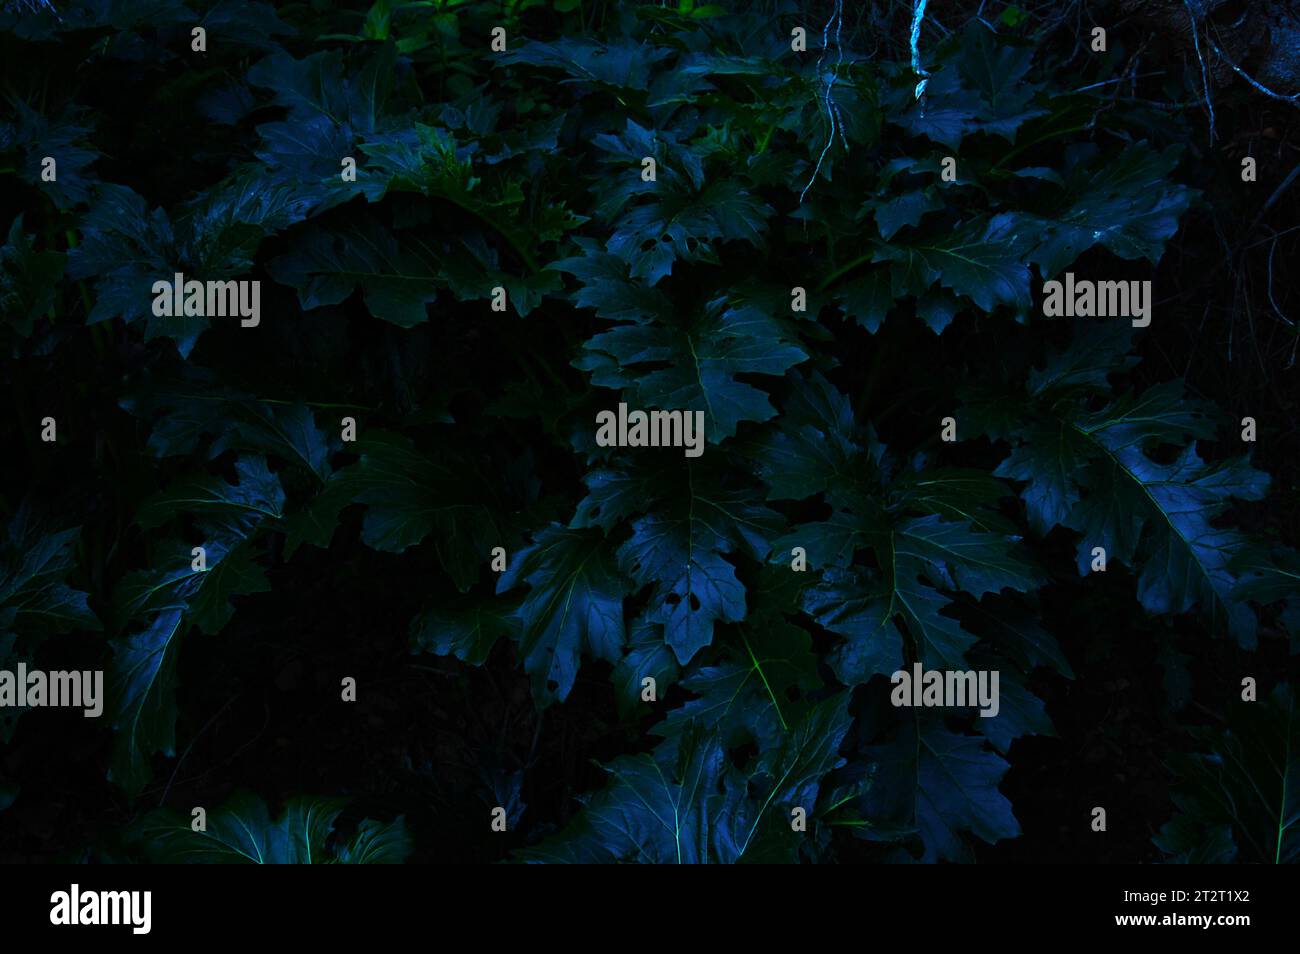 Set of unbloomed acanthus leaves. Bluish tone and ombre style in a low key photography. Stock Photo